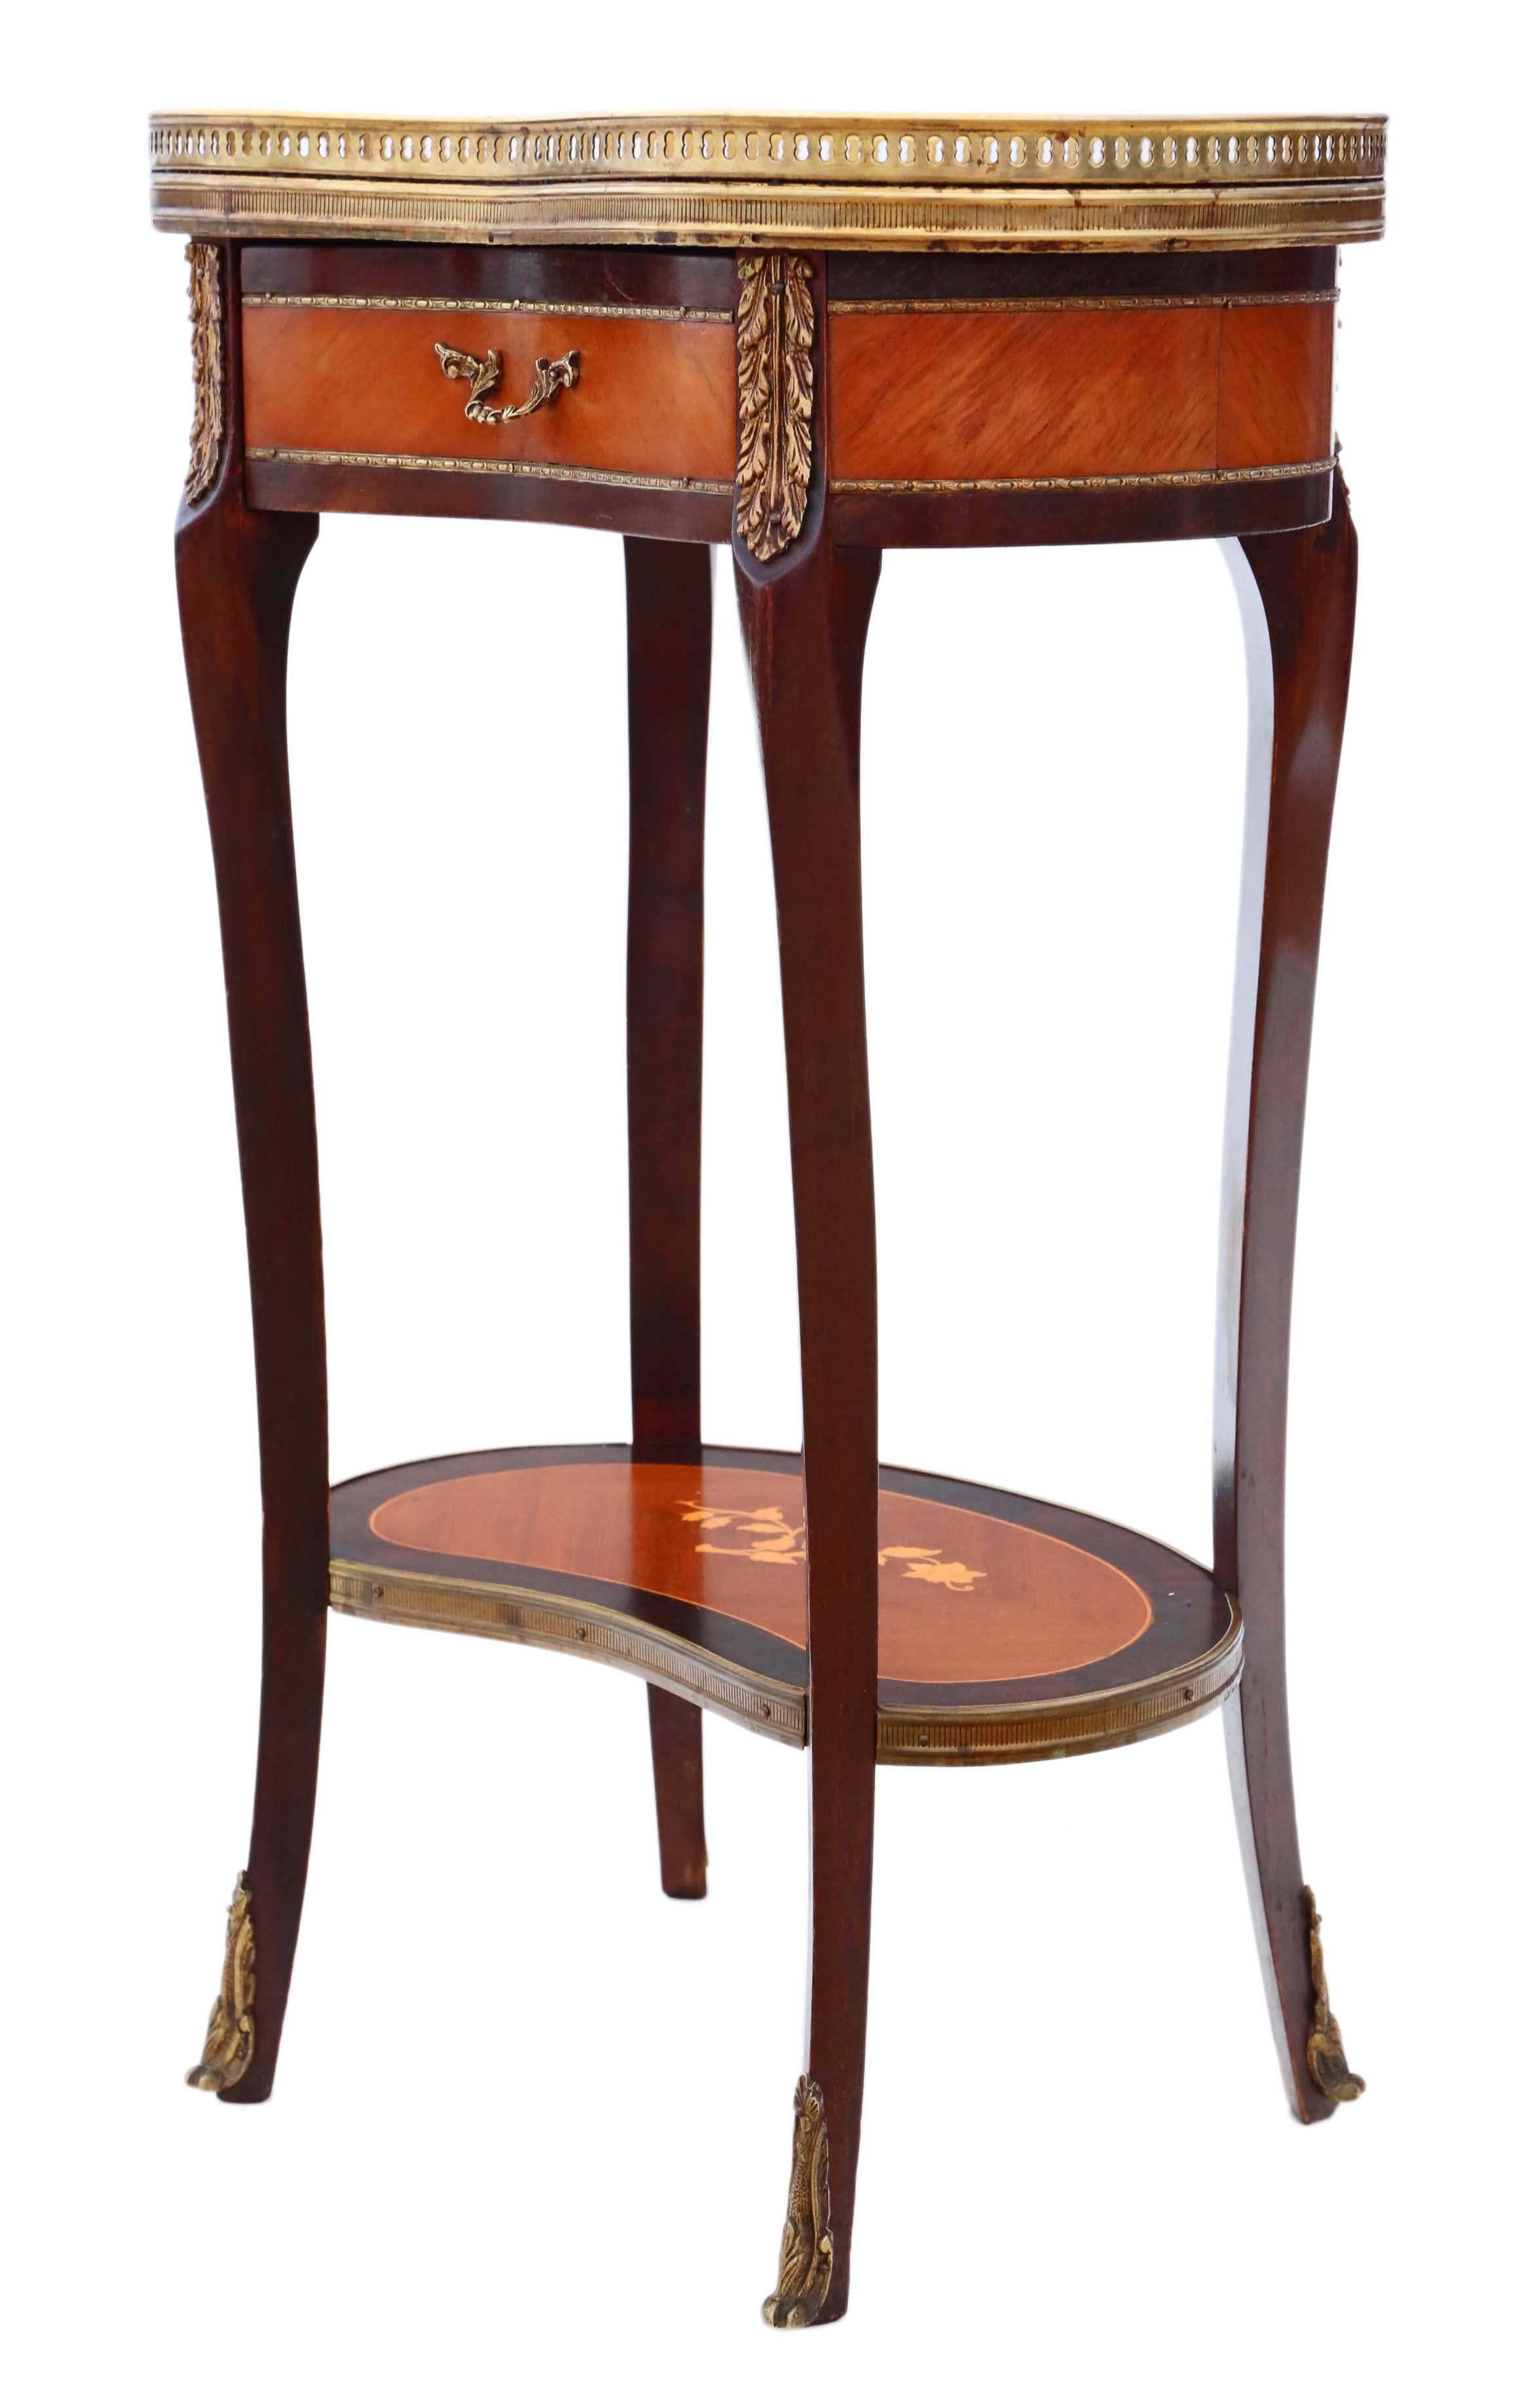 Early 20th Century French Inlaid Marquetry Marble Bedside Table